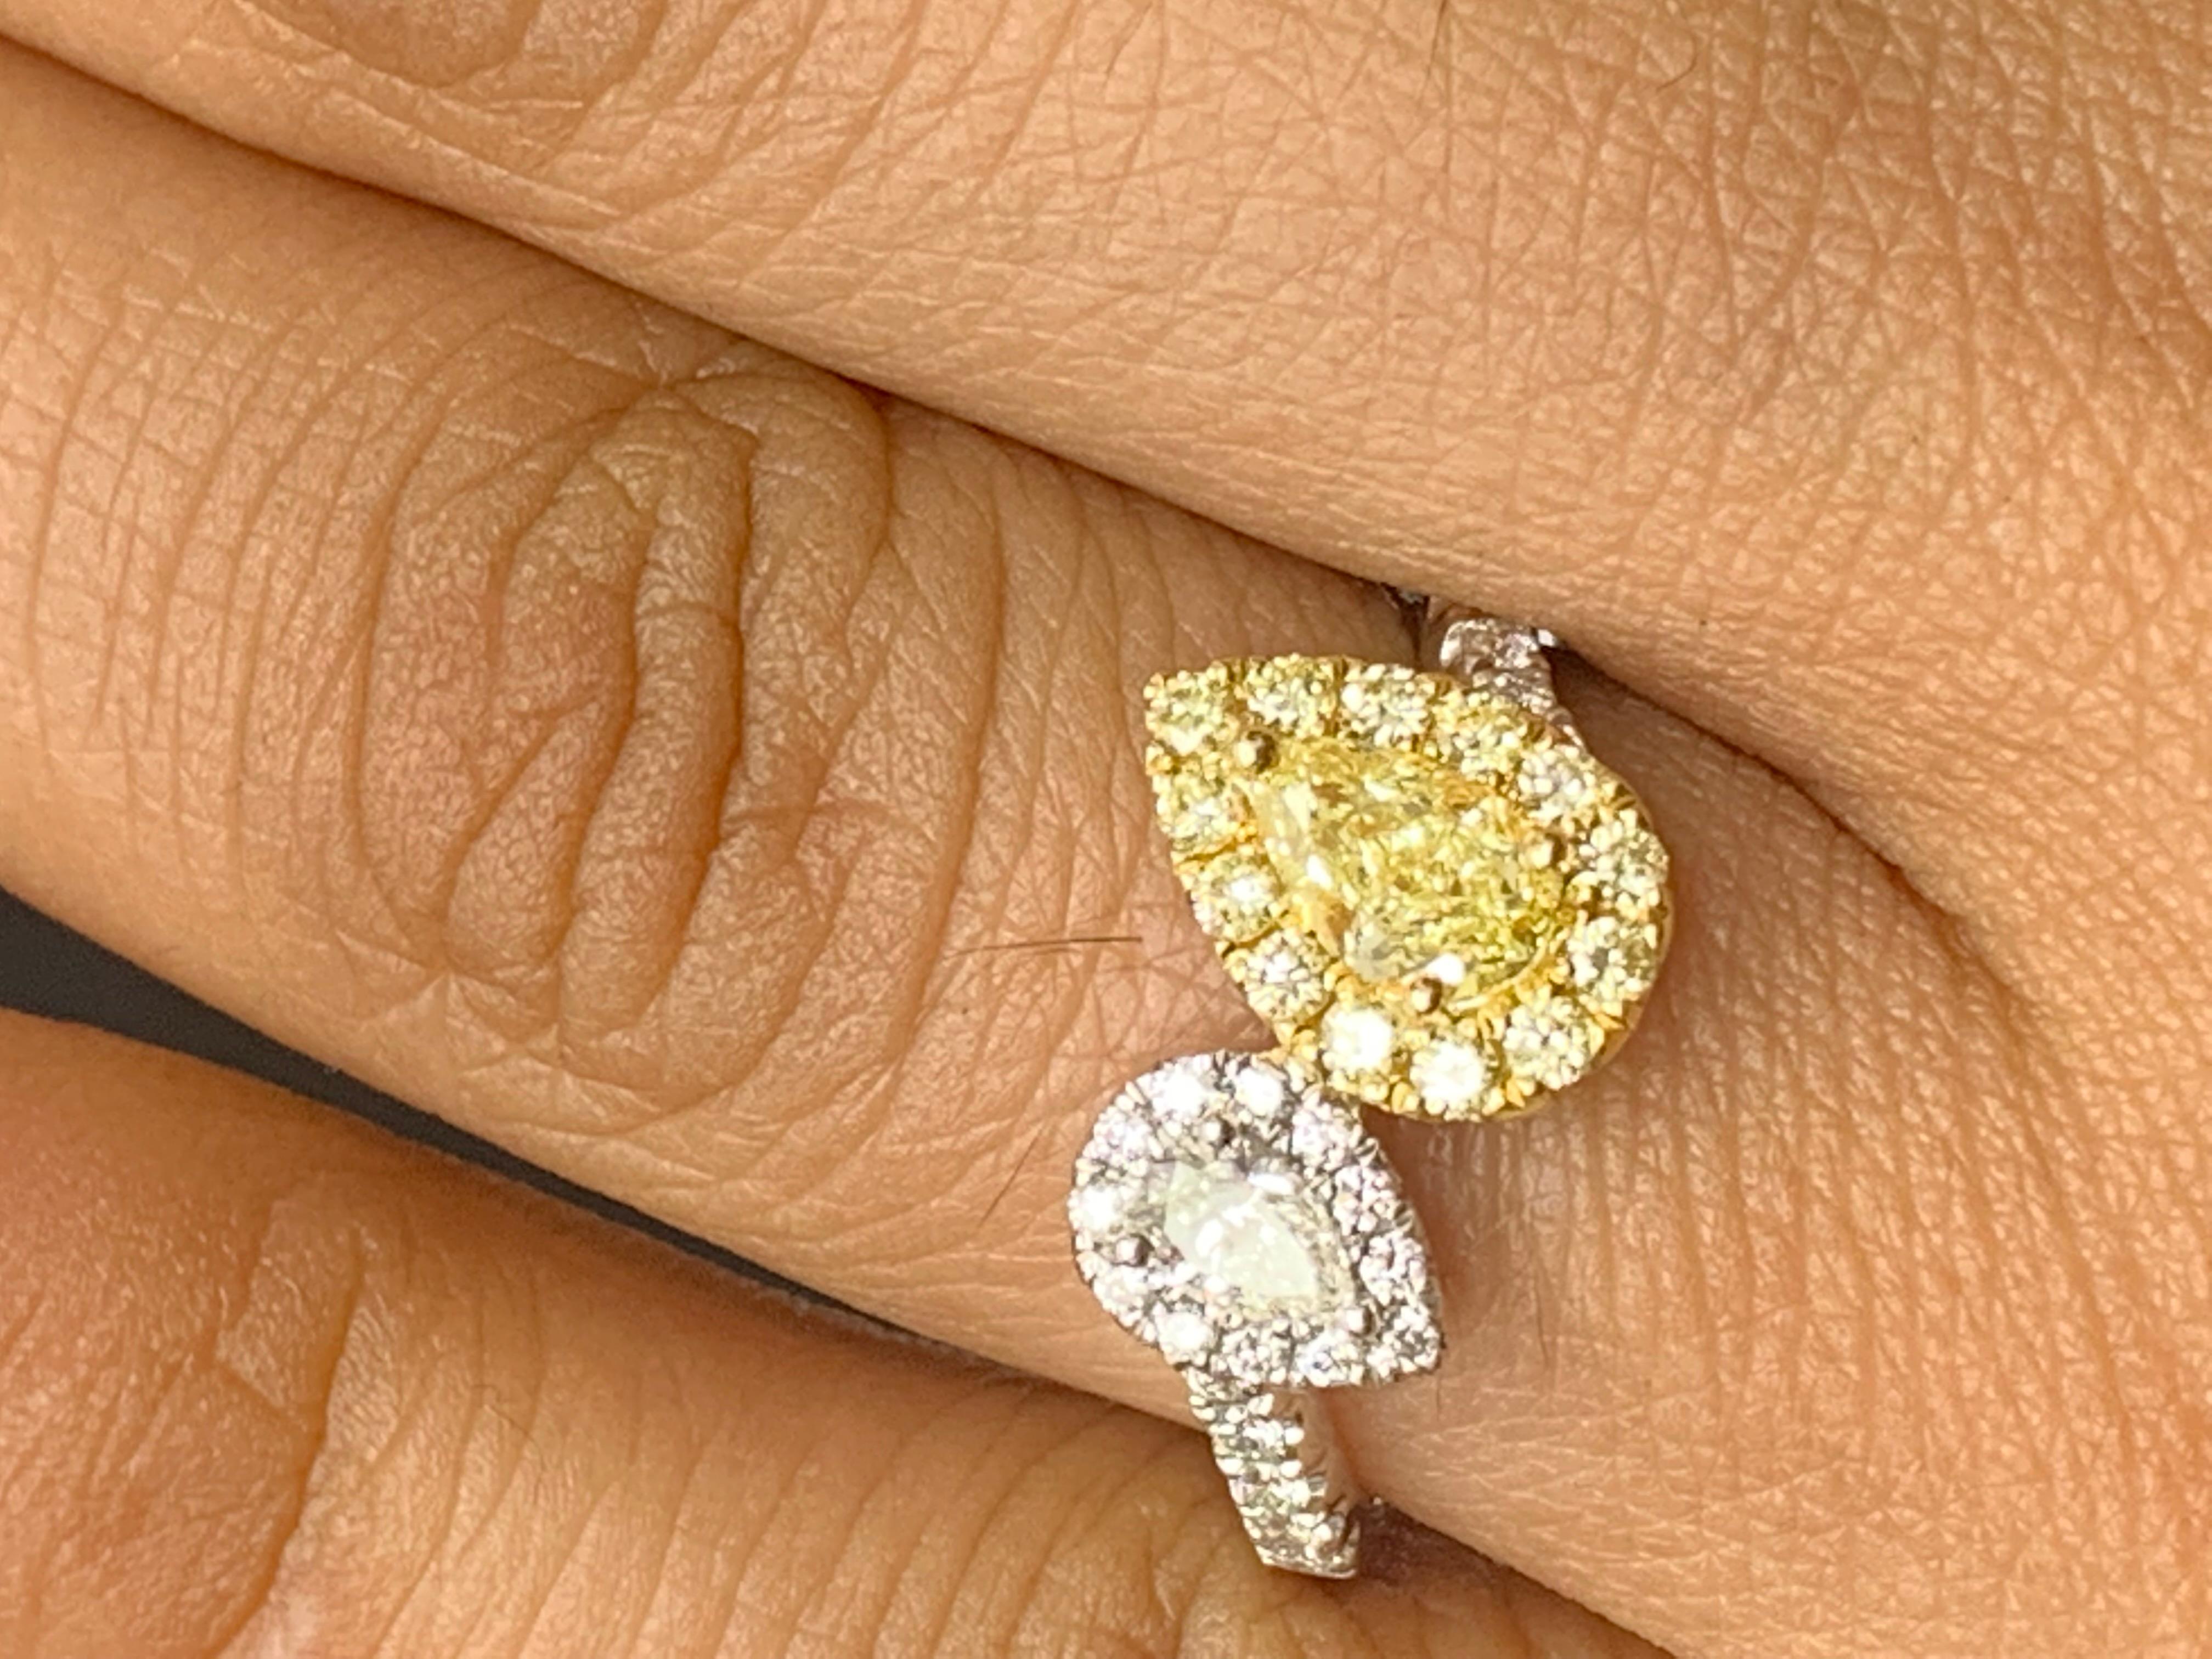 The stunning forever-together Toi et Moi ring features 1 pear shape yellow diamond weighing 0.51 carat and 1 pear shape white diamond weighing 0.18 carat in total. 35 accent Brilliant cut Diamonds surrounding the center stones from east to west